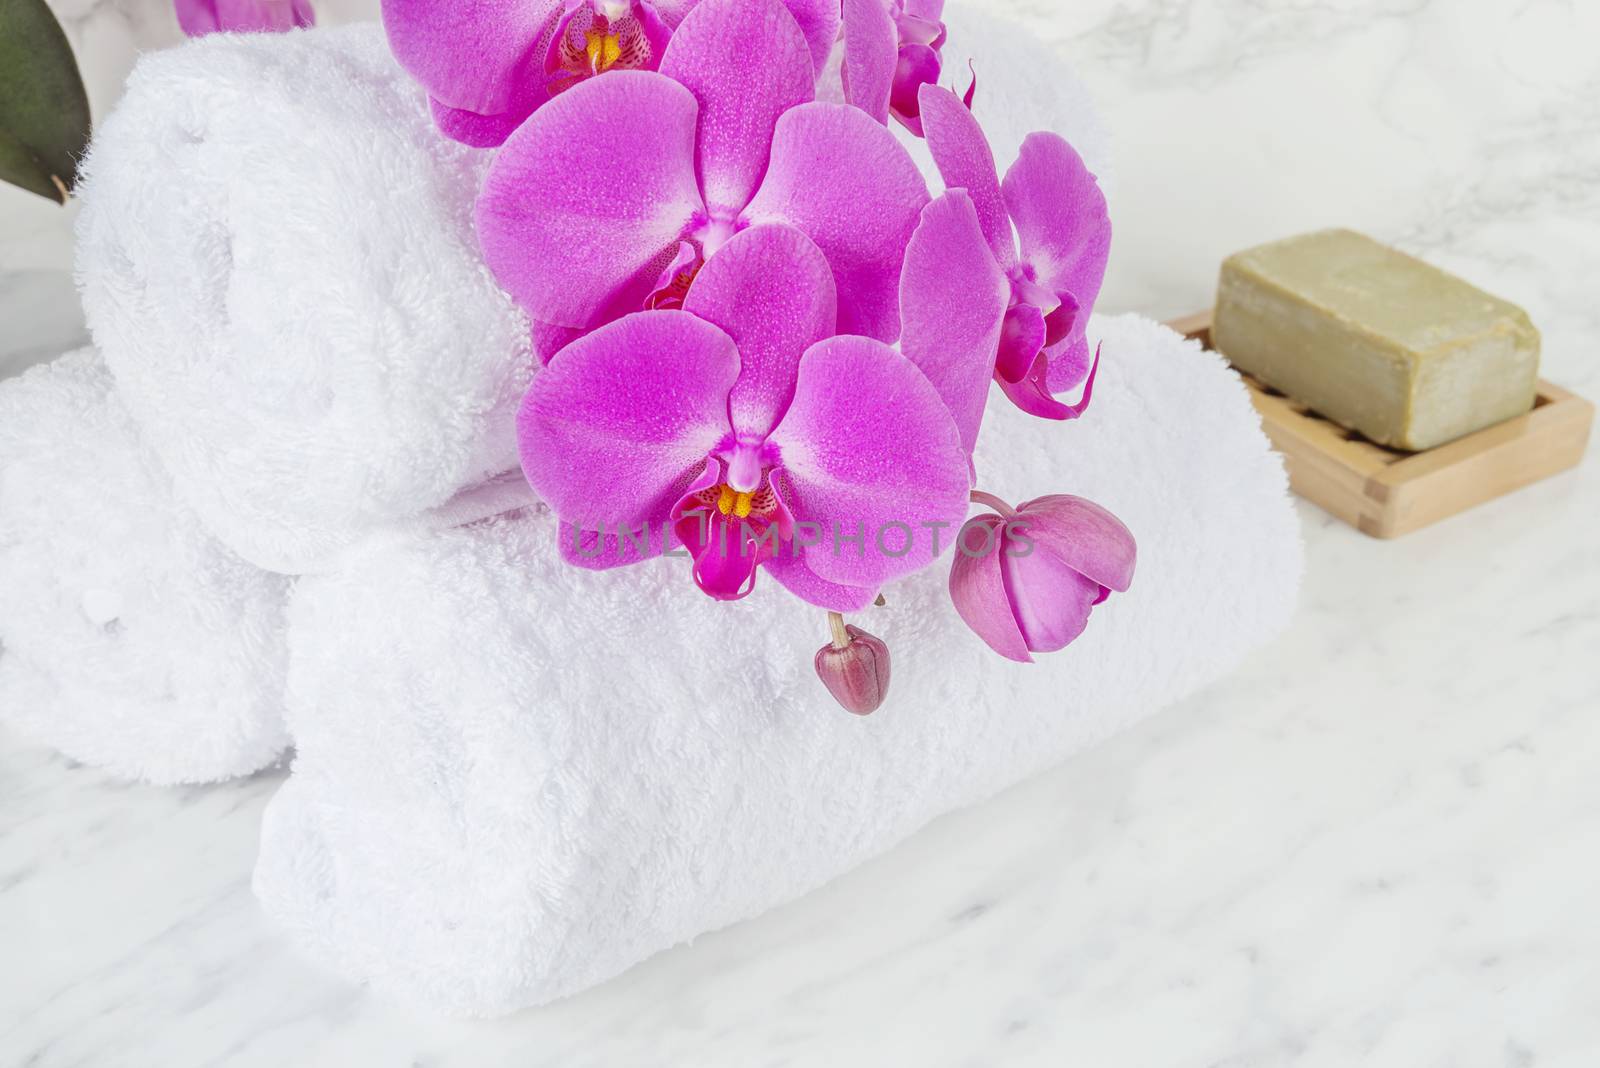 Bar of natural handmade soap, pink orchid flowers and white terry towels